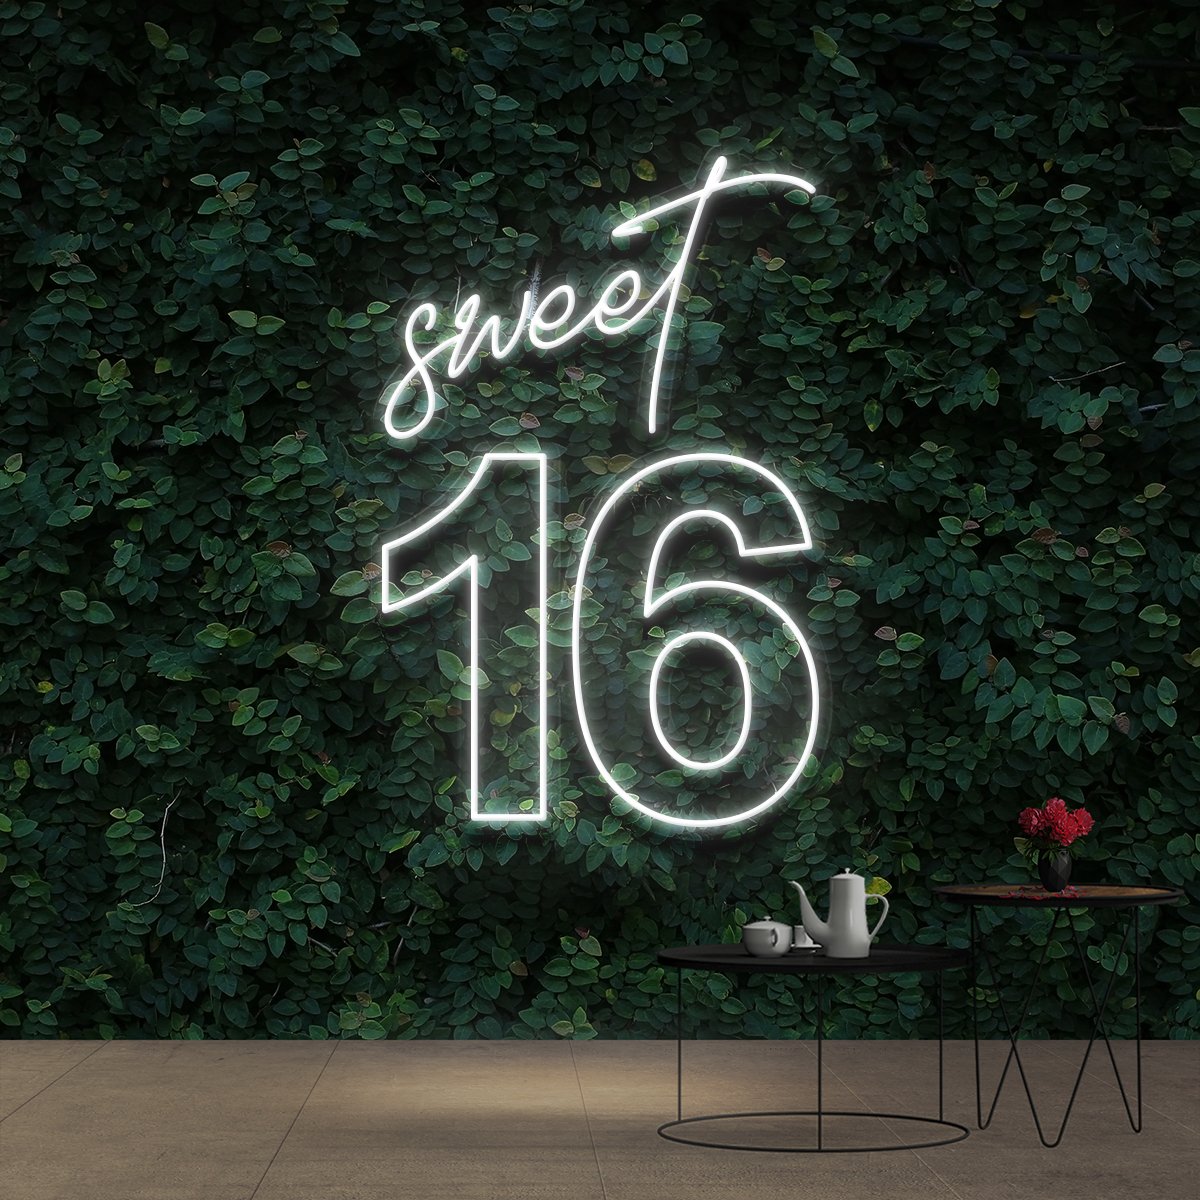 "Sweet 16" Birthday Neon Sign 60cm (2ft) / White / Cut to Shape by Neon Icons